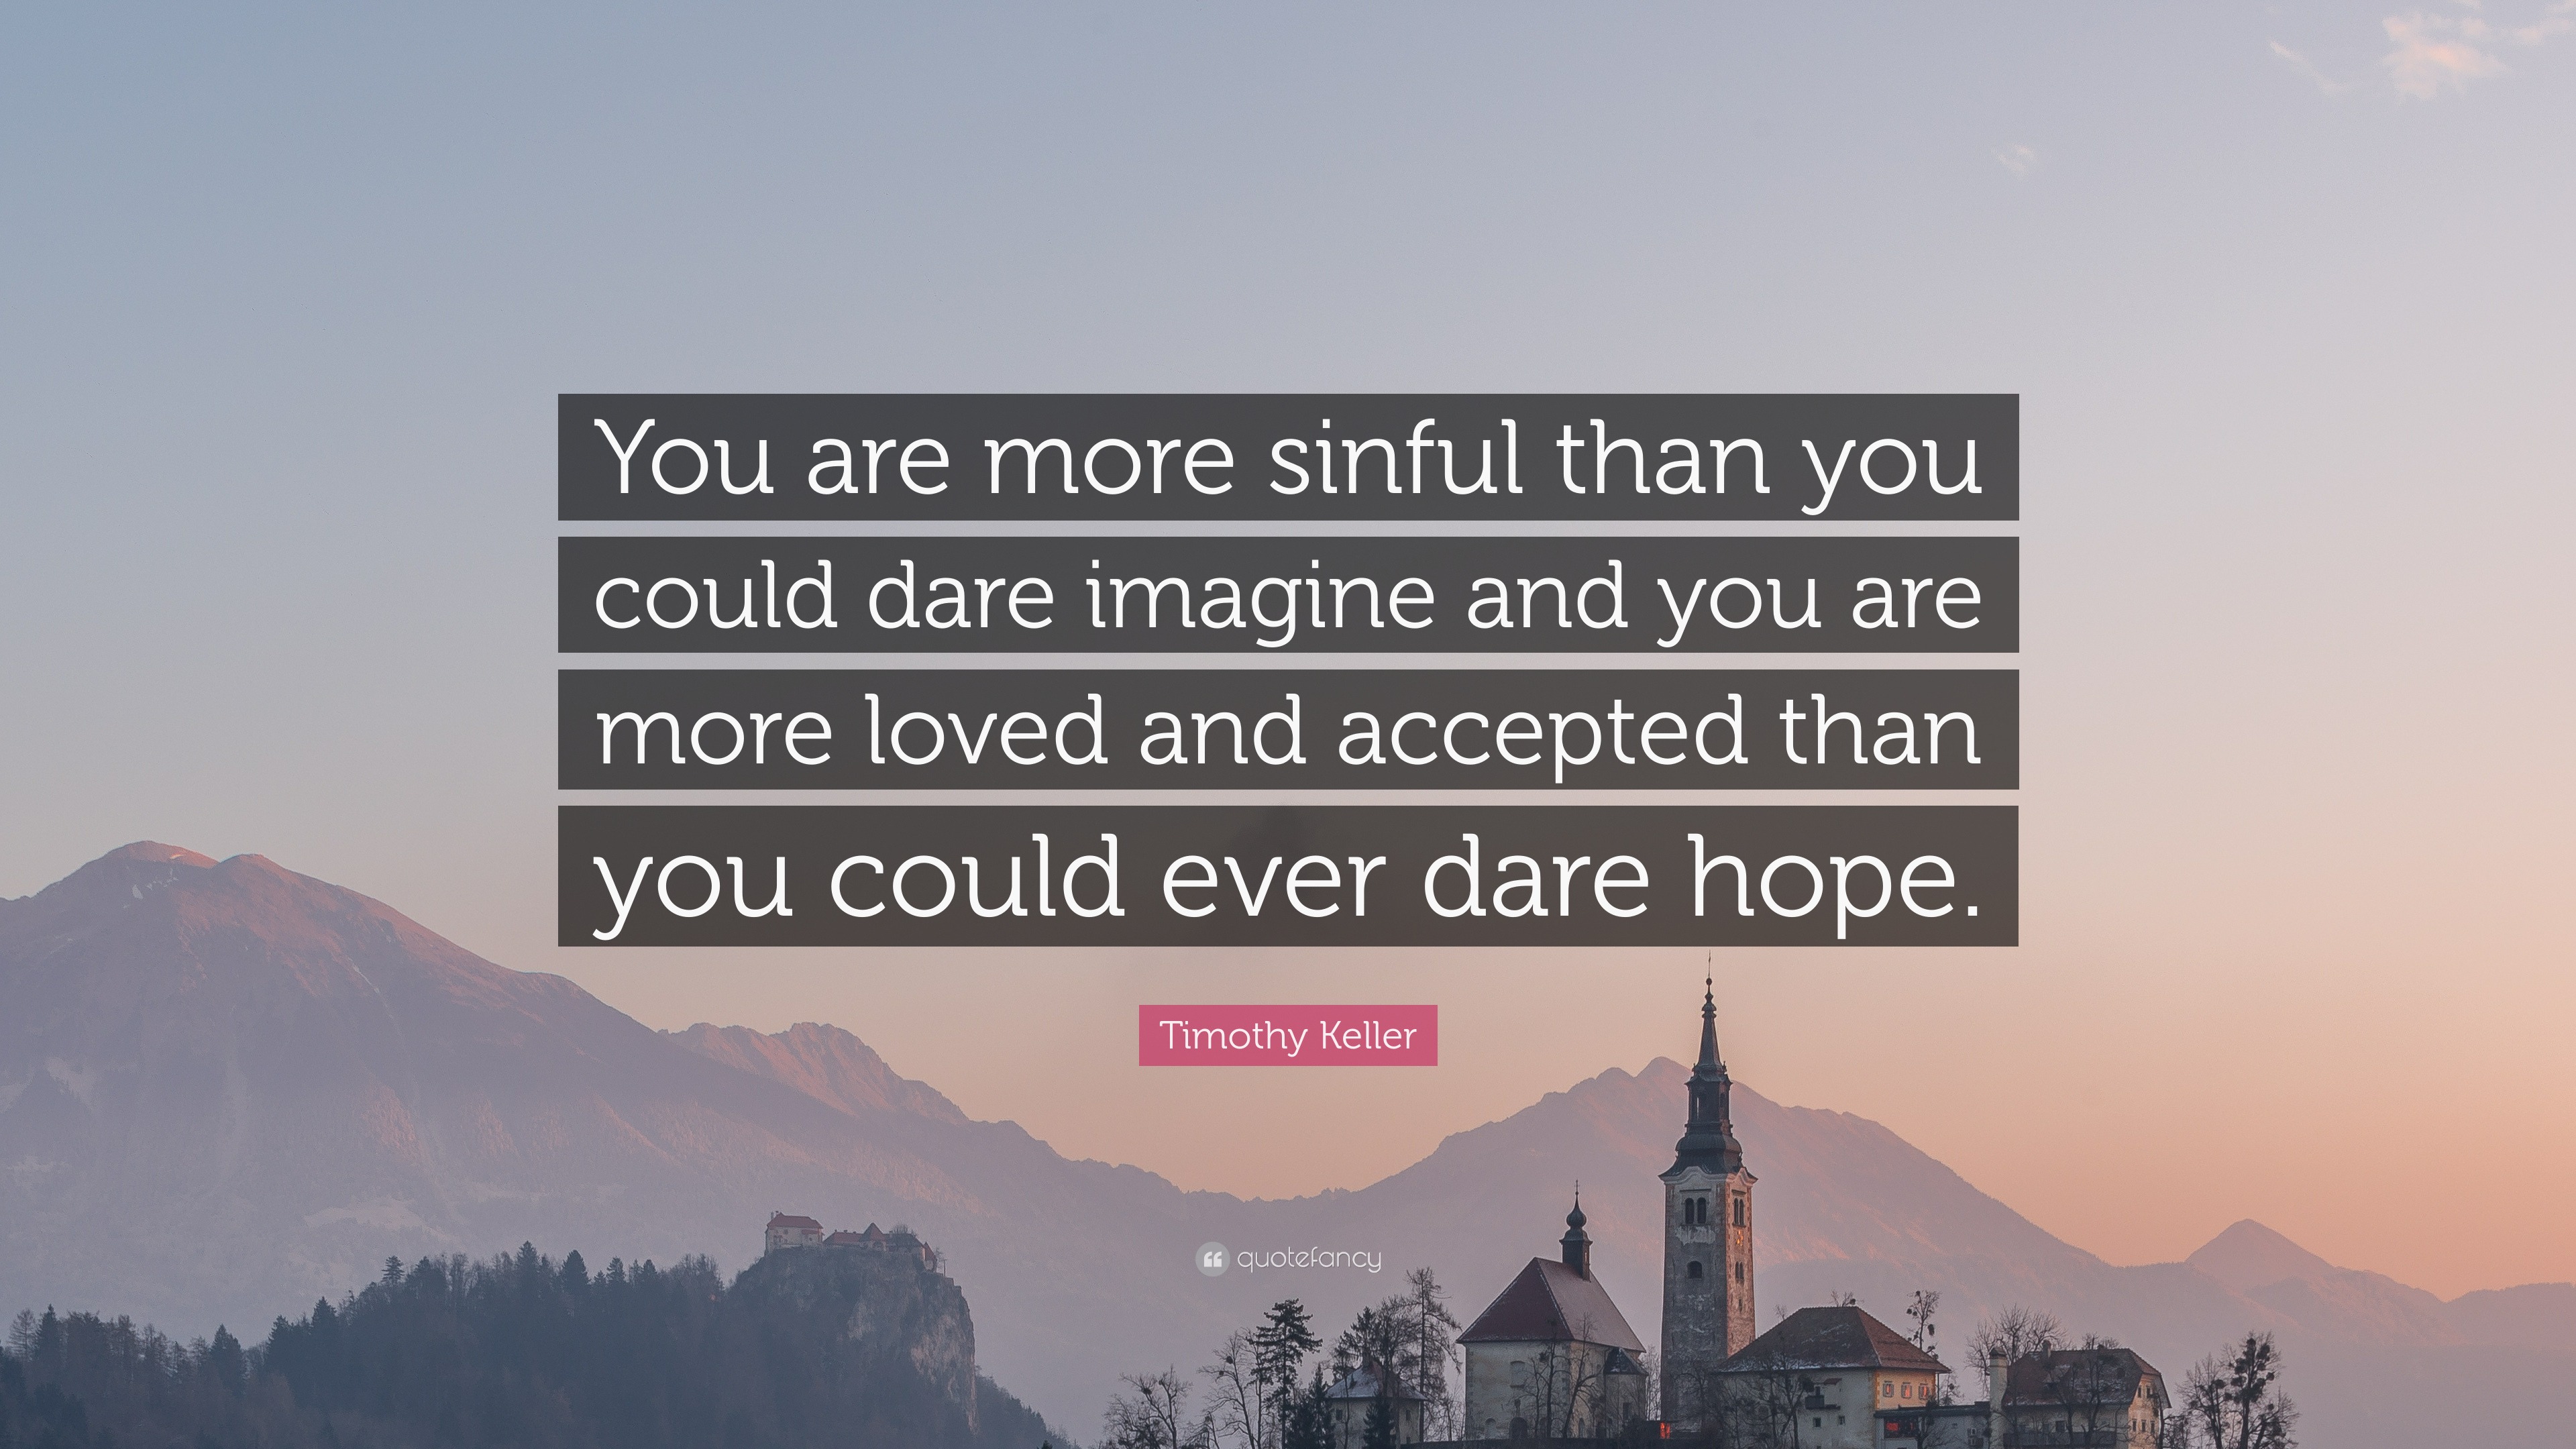 Timothy Keller Quote: “You are more sinful than you could dare imagine ...